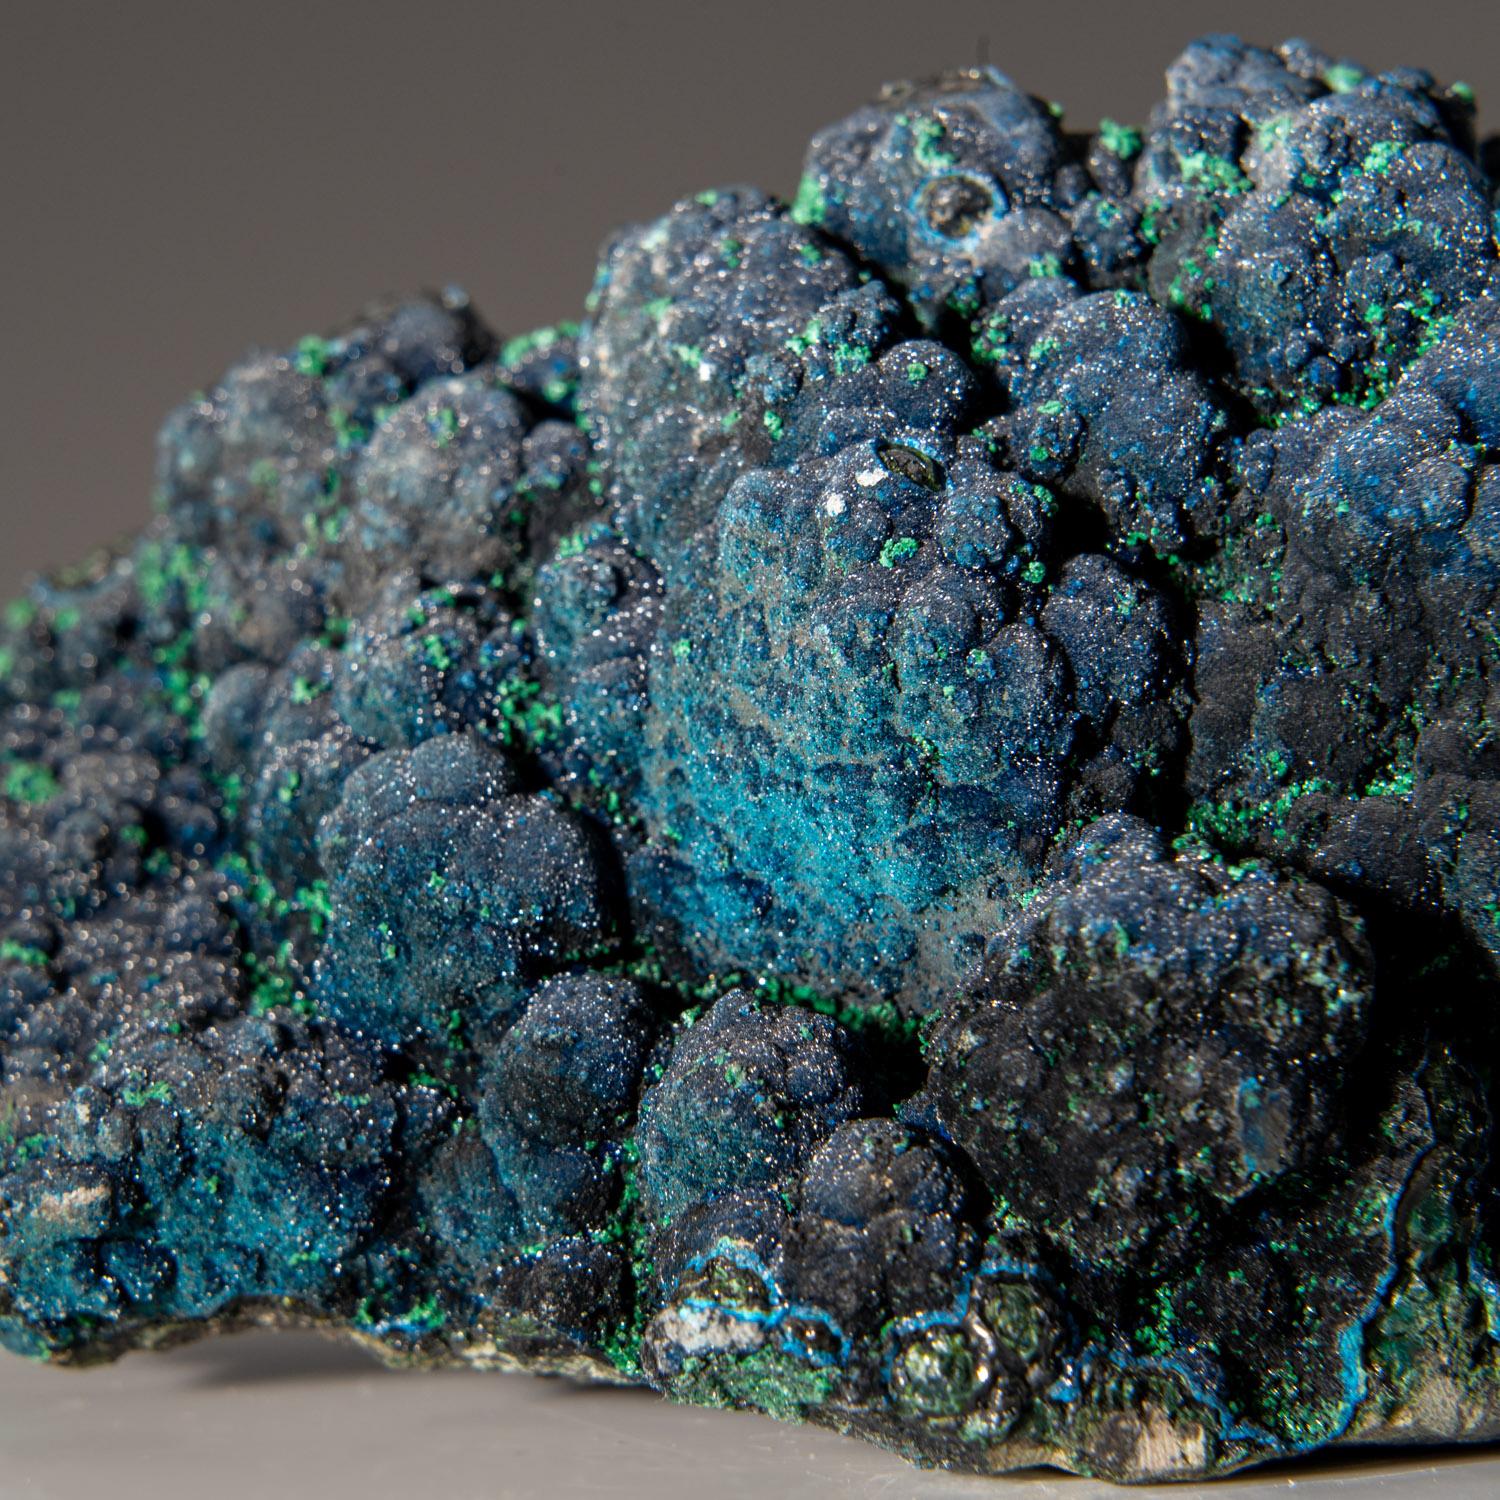 

From Kolwezi, Katanga, Democratic Republic of the Congo (Zaire)

Colorful specimen of lustrous translucent blue cornetite crystals with translucent green malachite crystals covering the surfaces of brown matrix. The cornetite crystals look